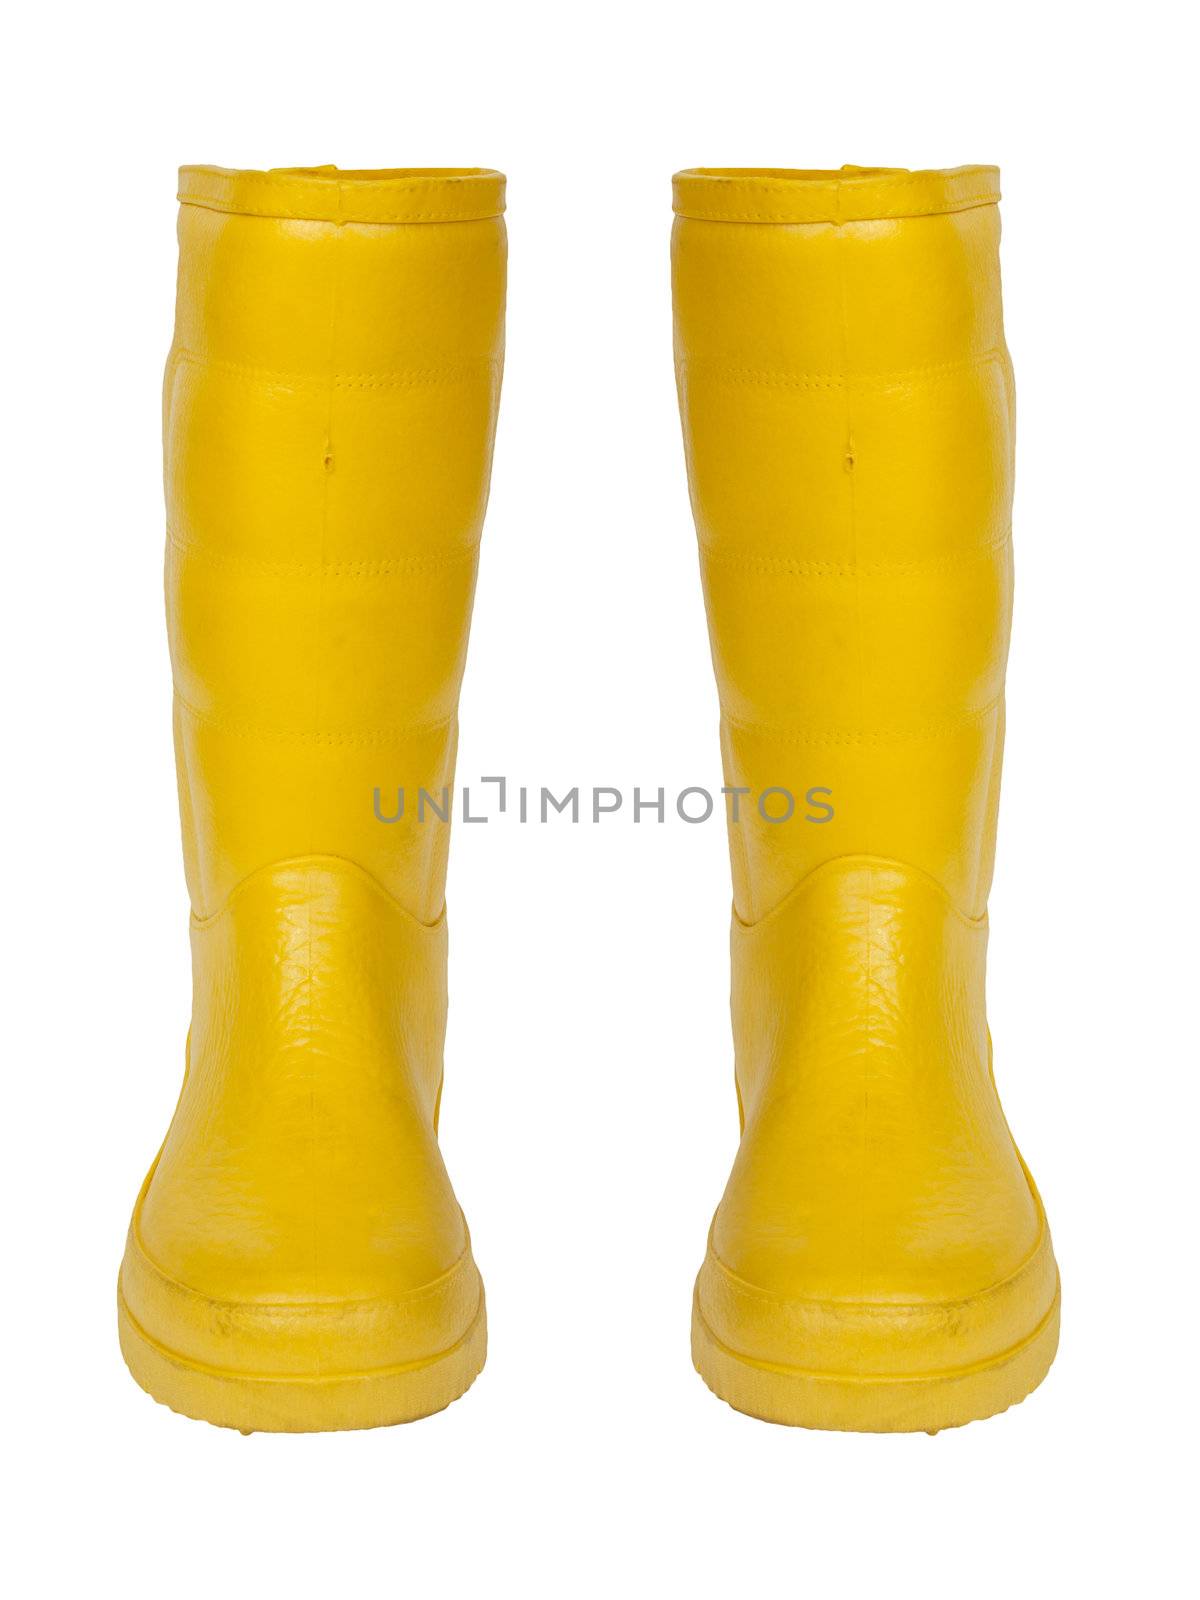 rubber boot yellow color